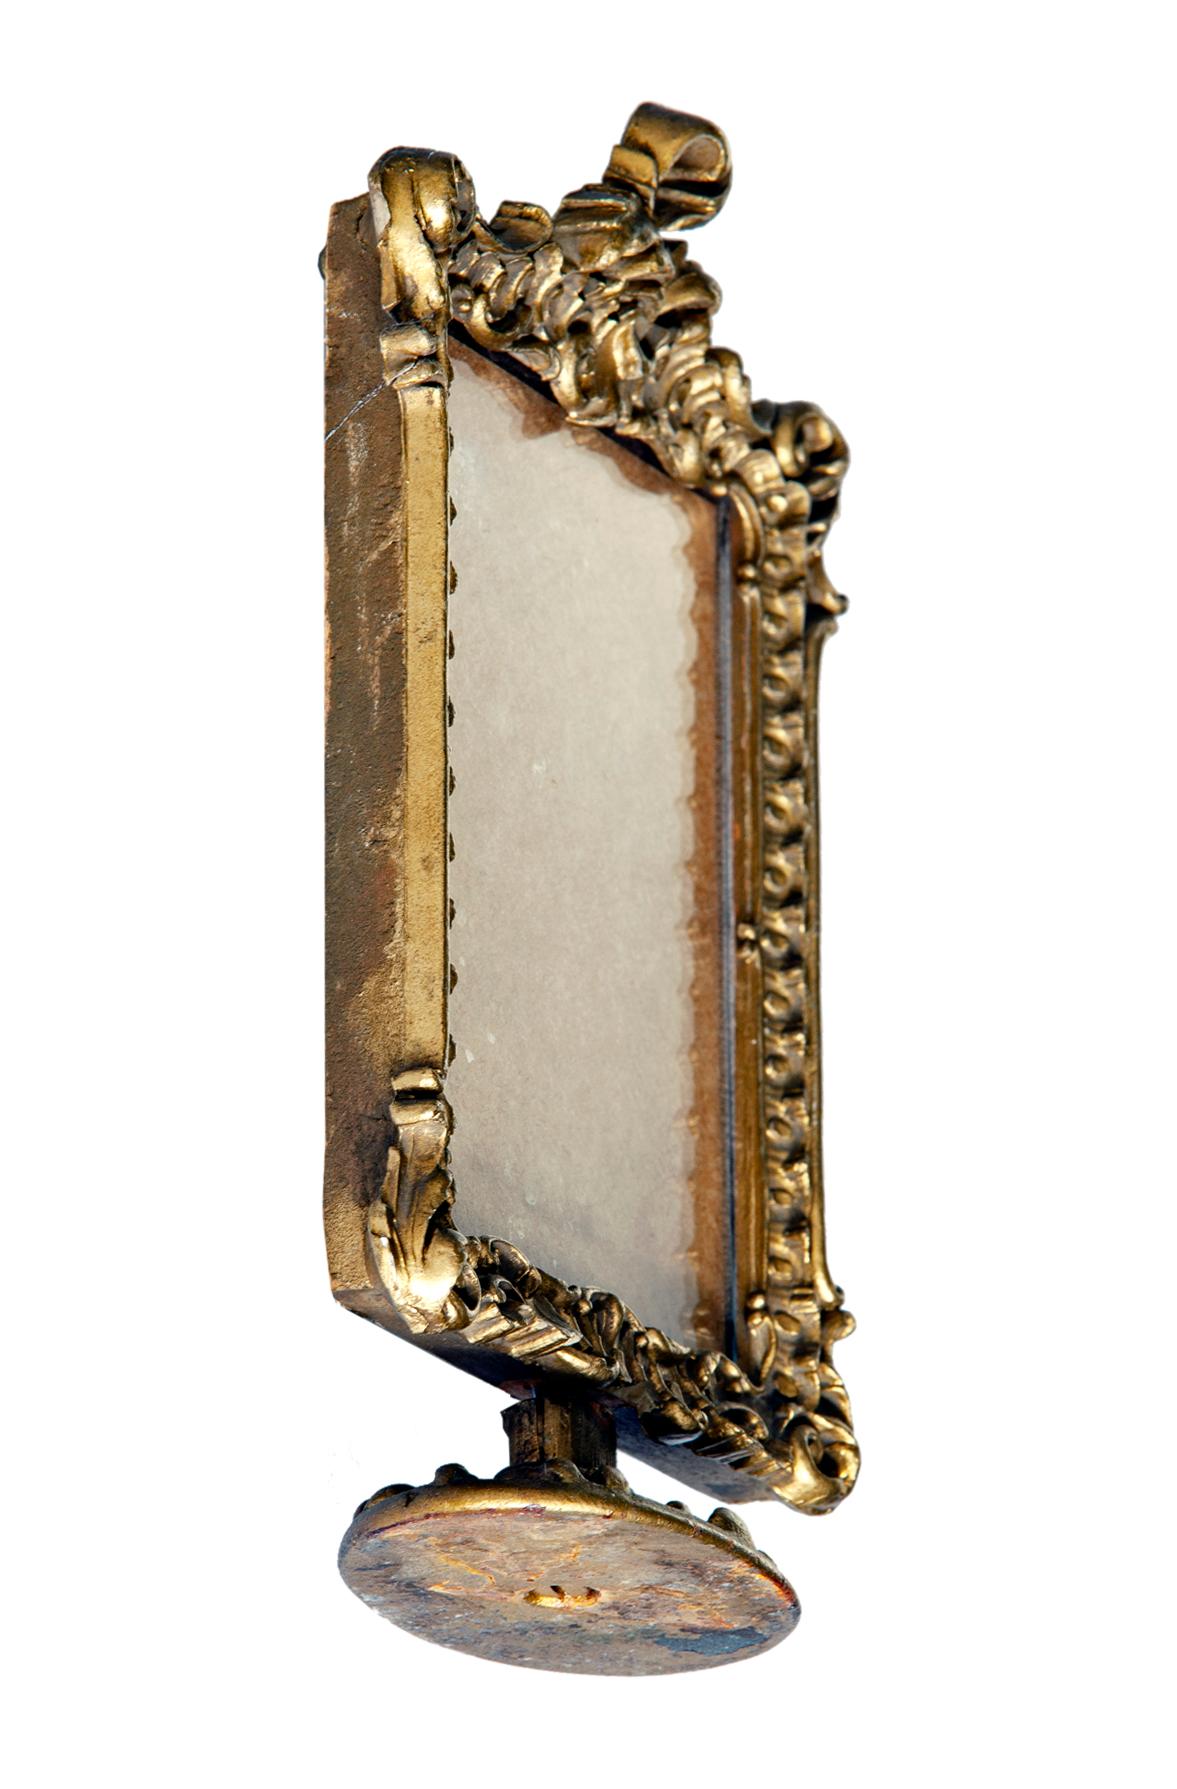 Hand-Crafted Small Hand Carved Gold Antique Picture Frame